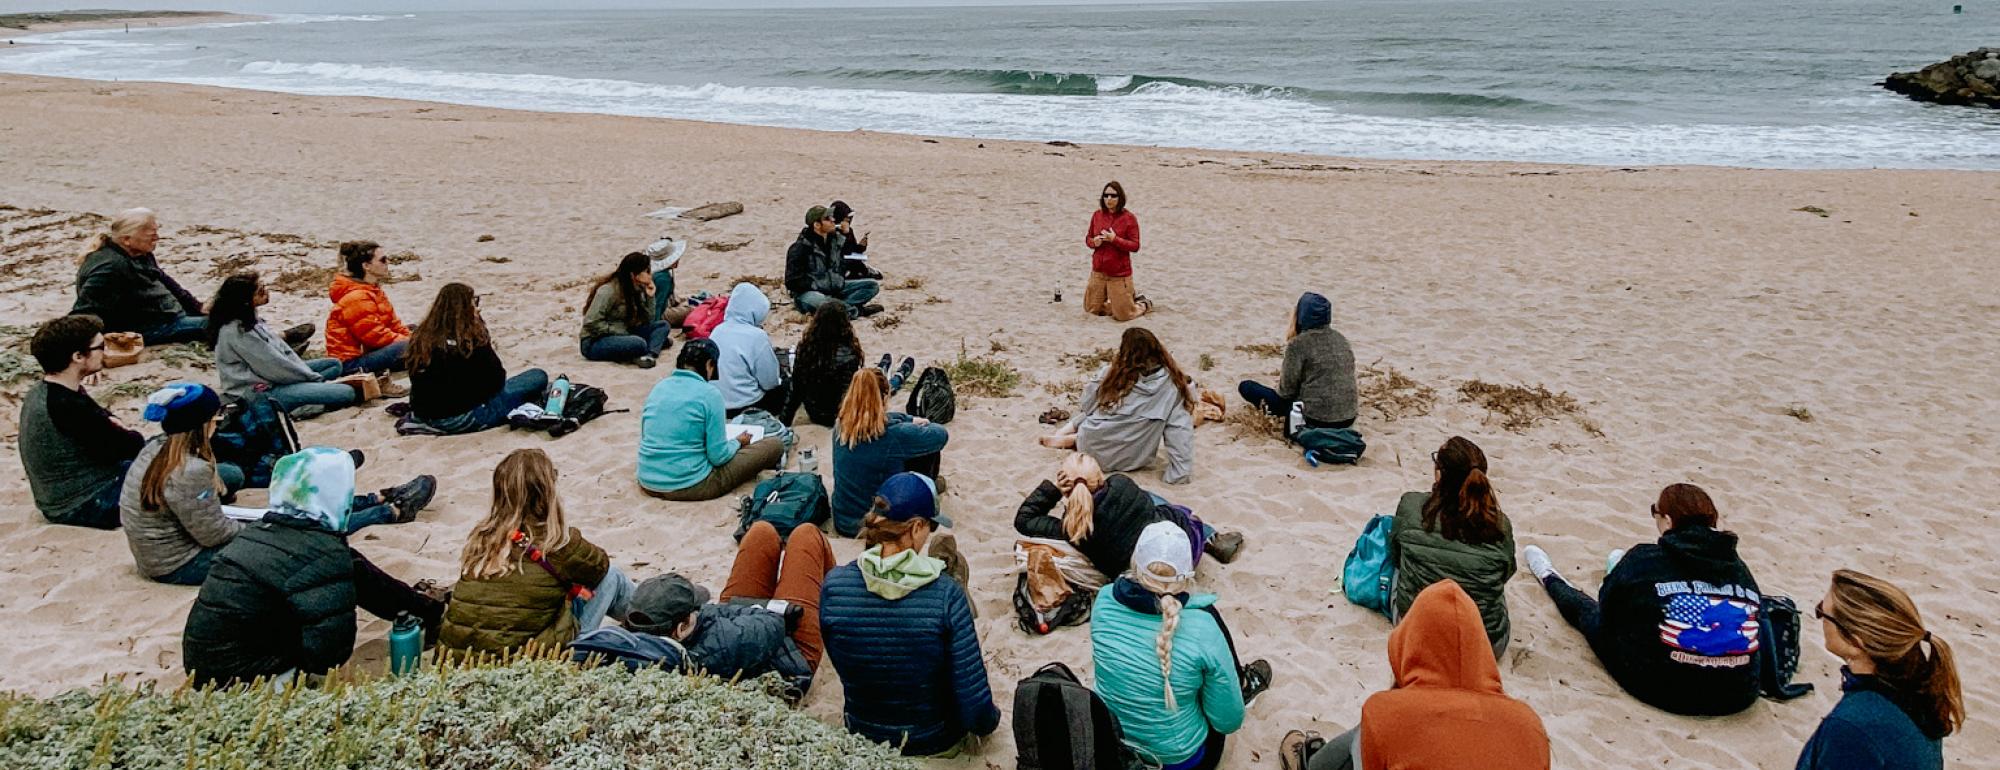 Rx One Health 2021 participants learning on the beach in Moss Landing